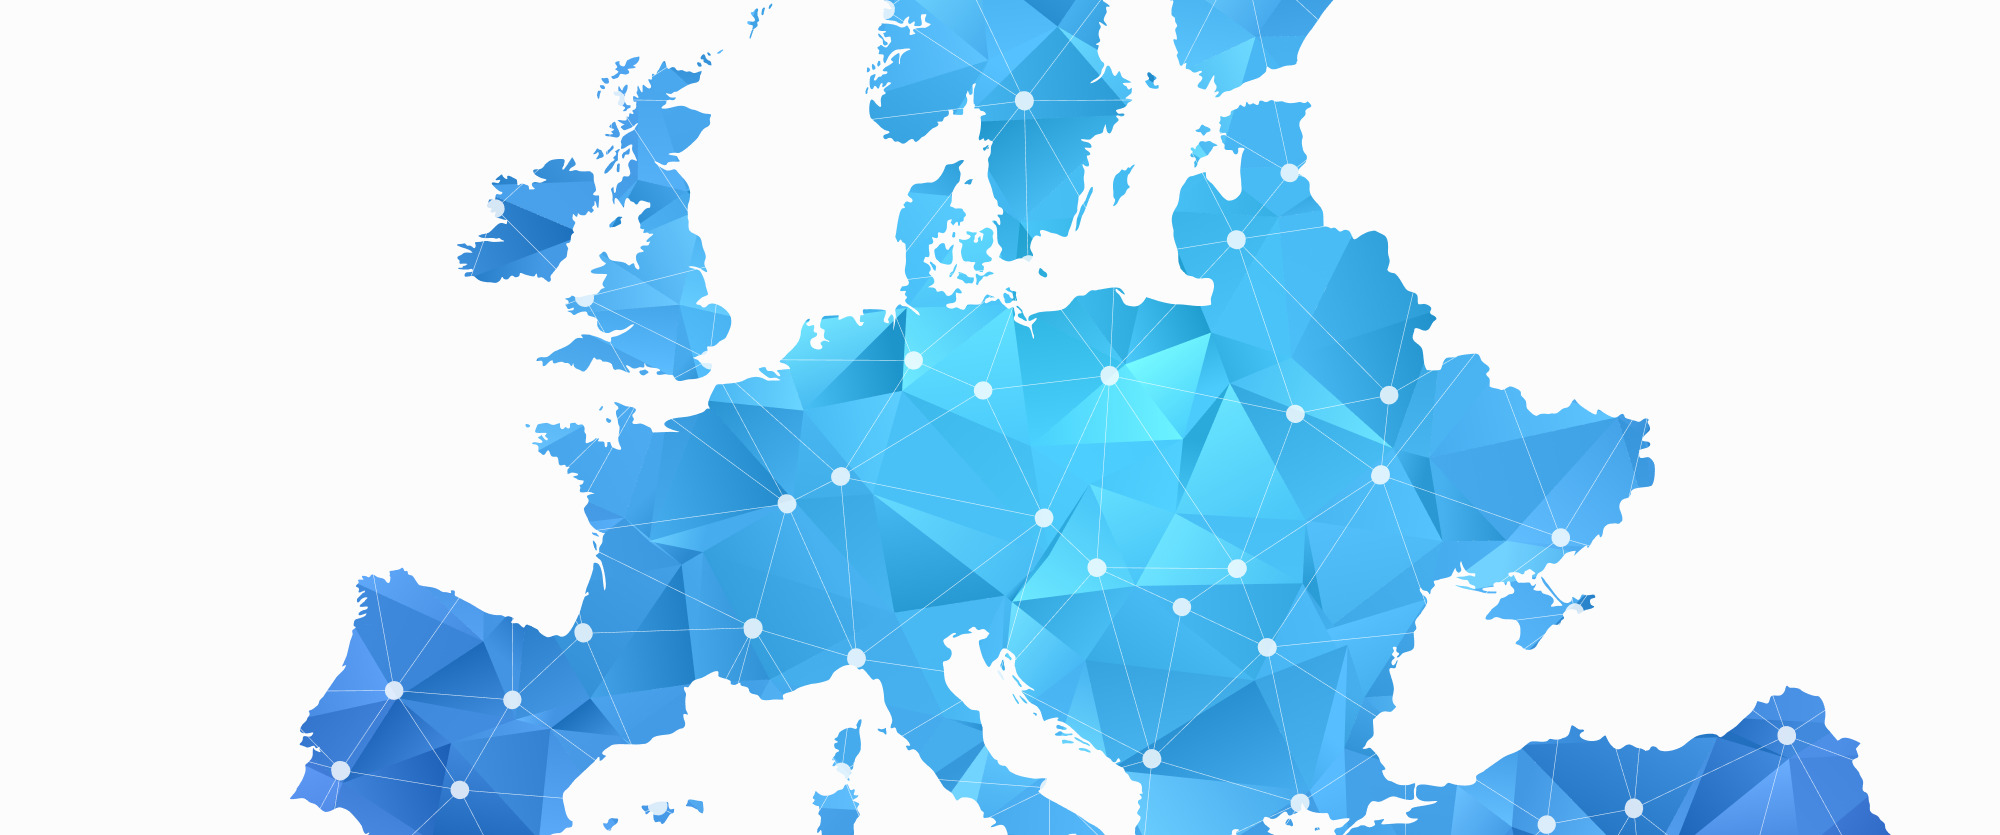 Is the EU the perfect place for startup unicorns? - Seedrs Insights